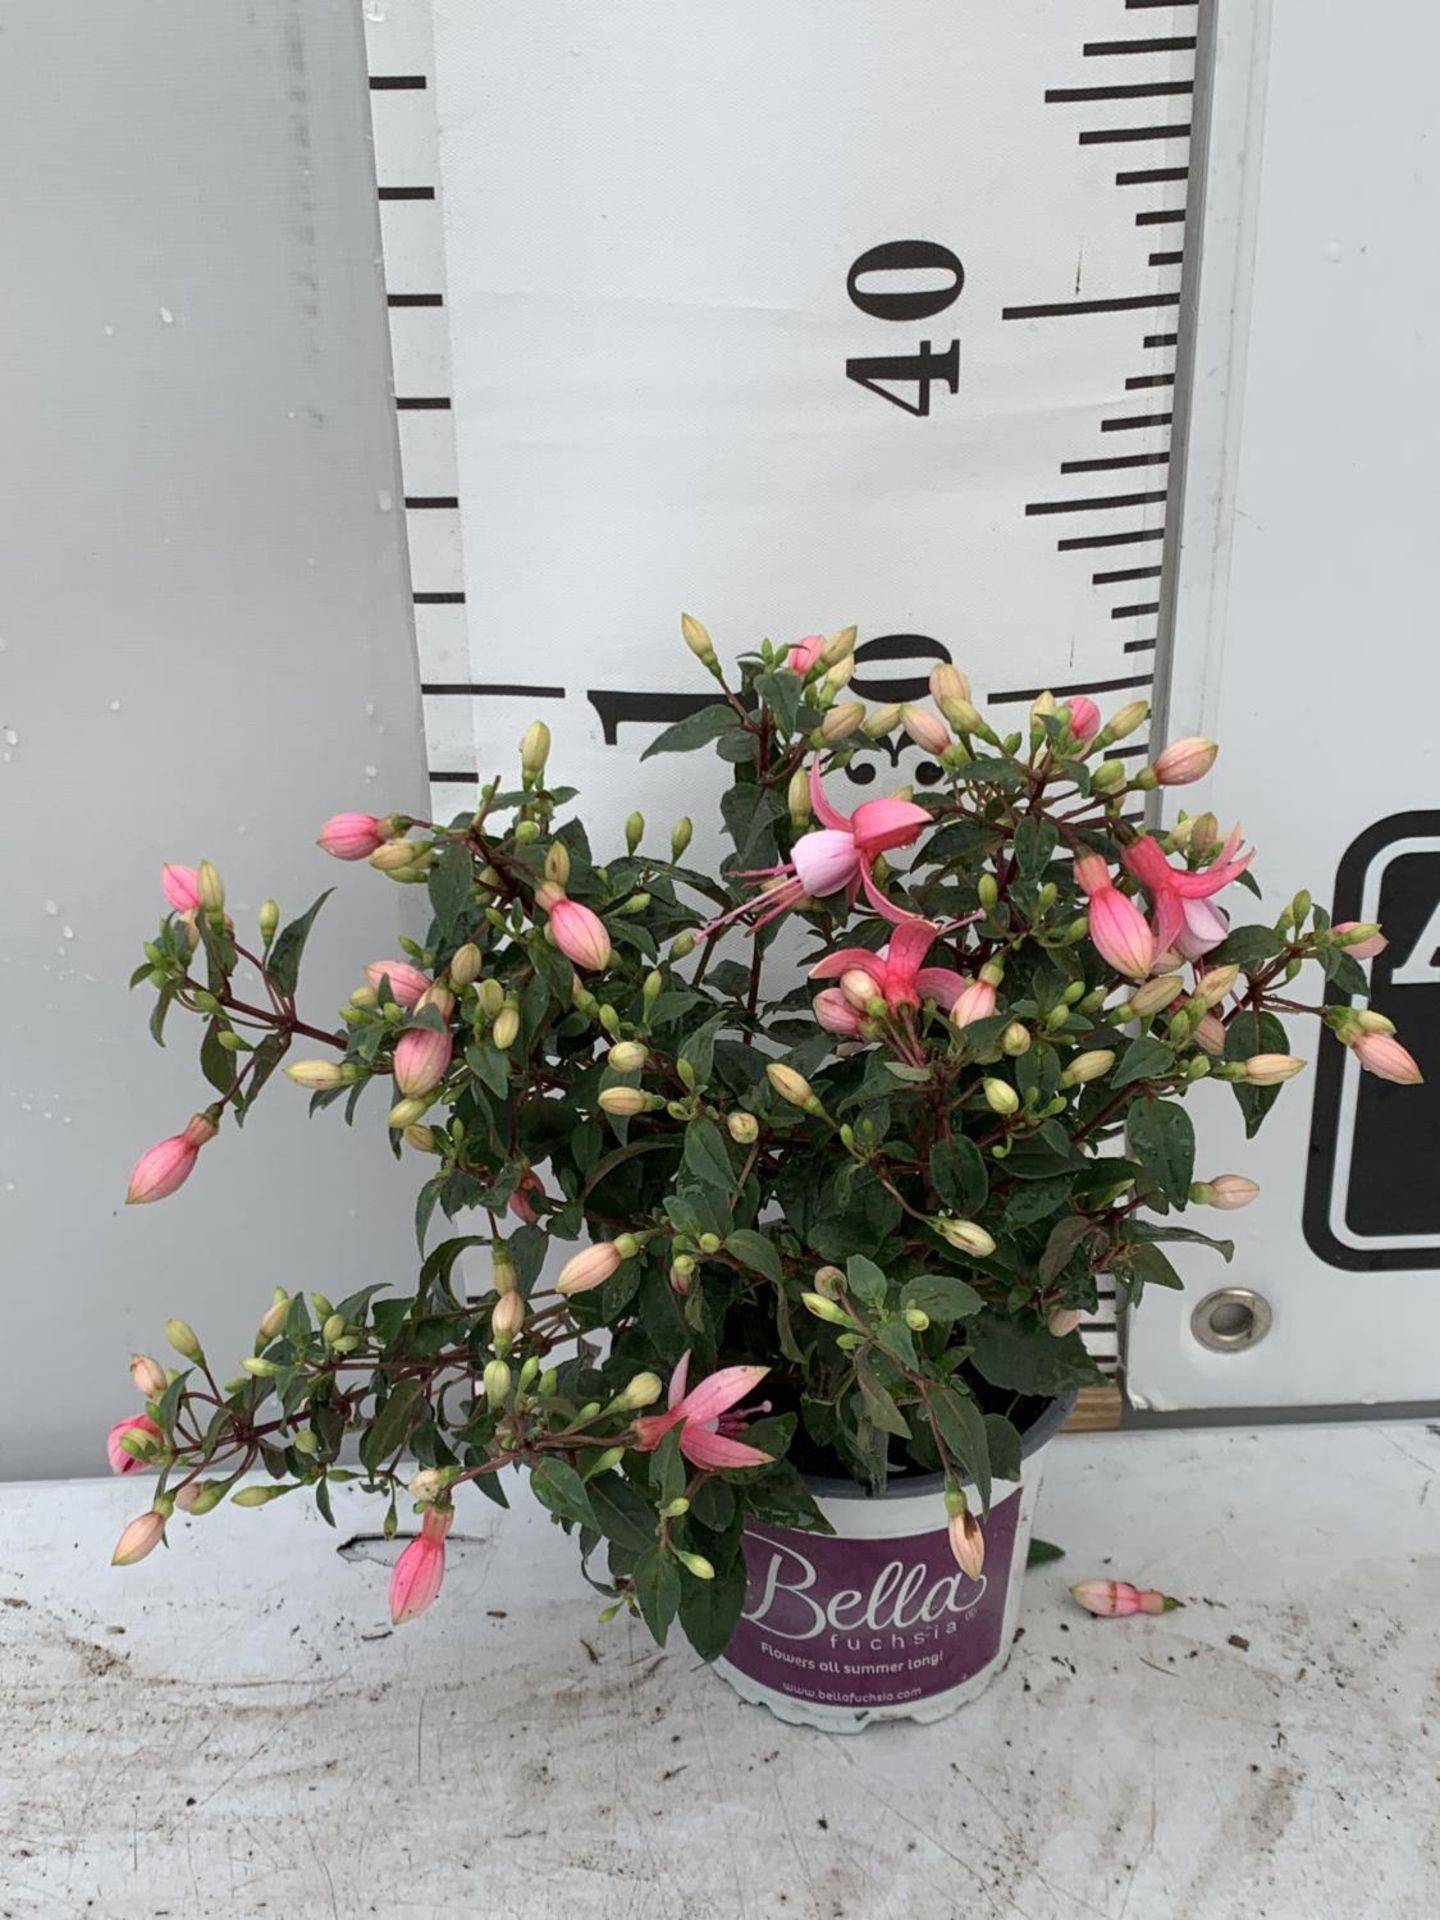 NINE FUCHSIA BELLA IN 20CM POTS 20-30CM TALL TO BE SOLD FOR THE NINE PLUS VAT - Image 5 of 5